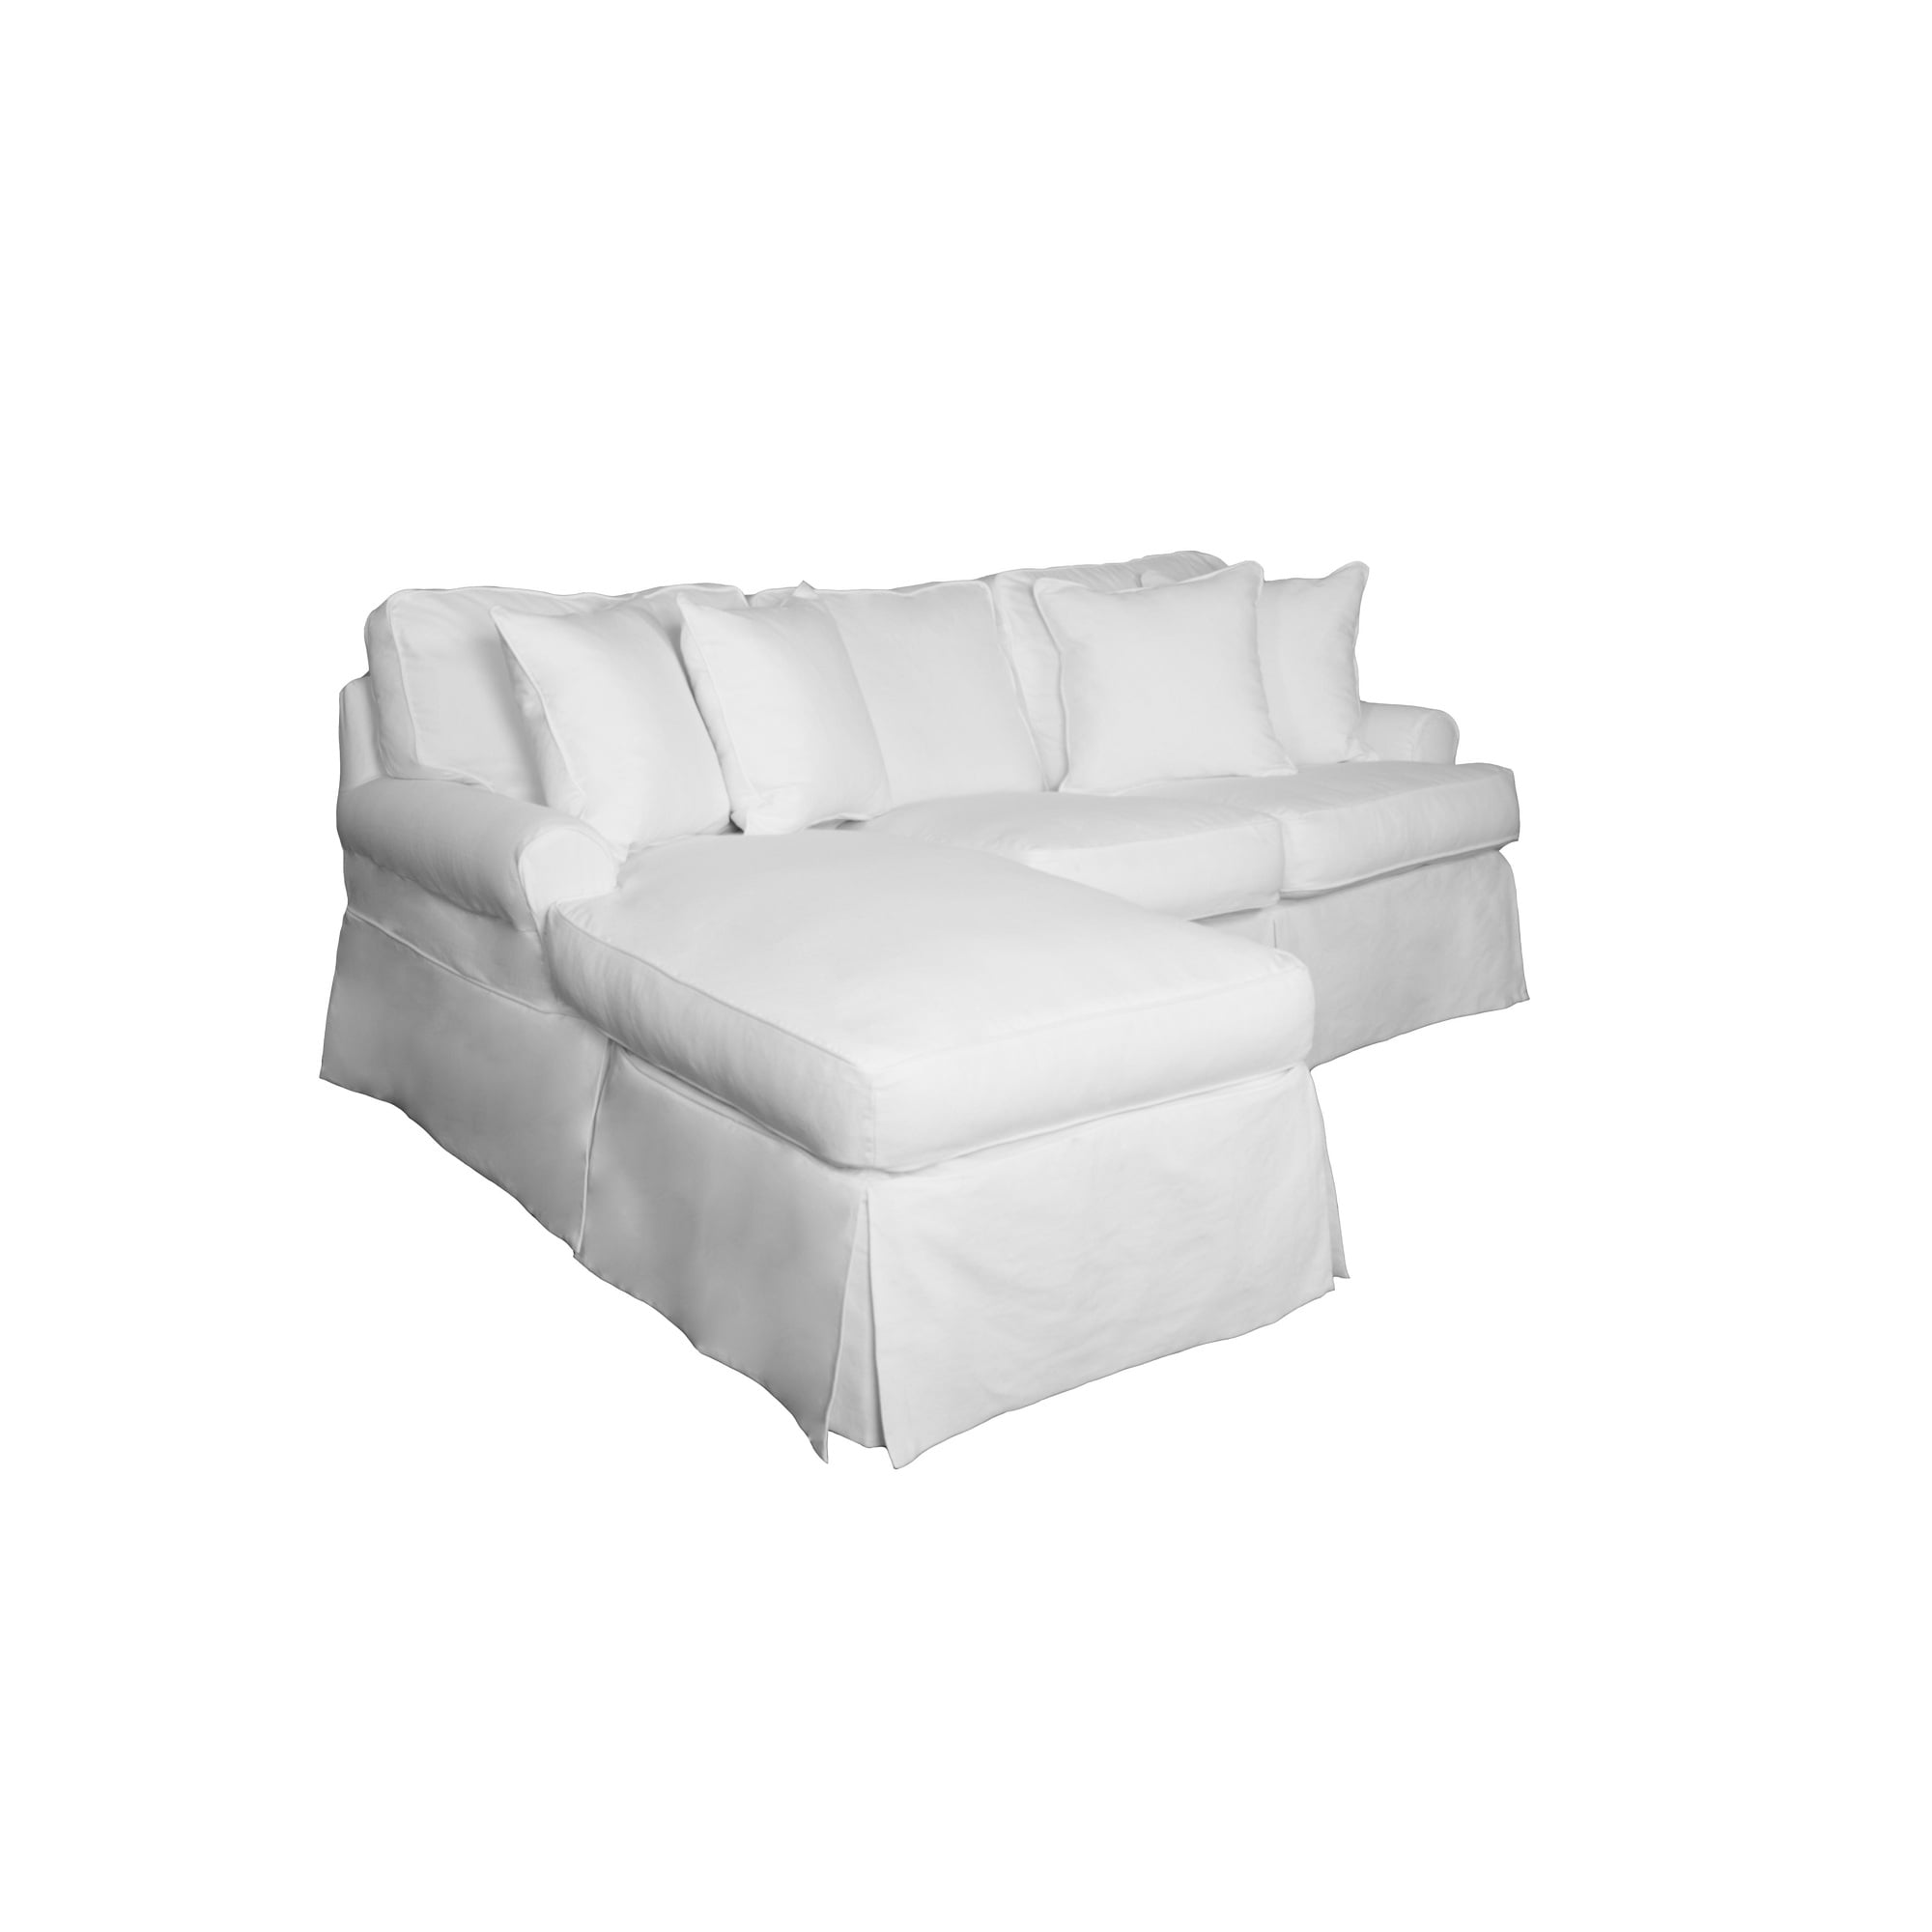 T Cushion Sectional Sofa With Chaise, Deluxe Sleeper Sofa Slipcover